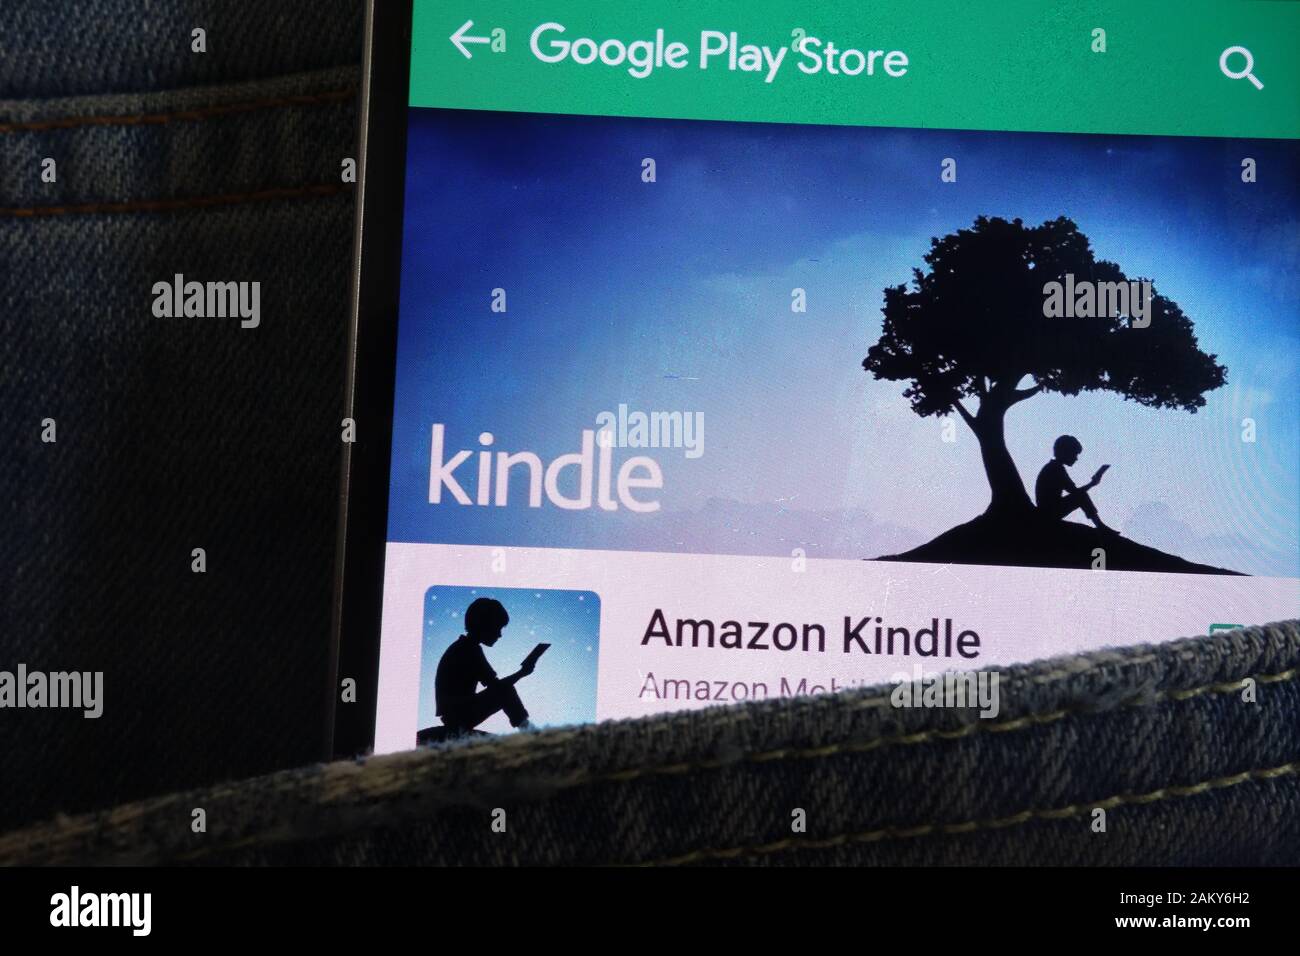 Kindle app on Google Play Store website displayed on smartphone hidden in jeans pocket Stock Photo